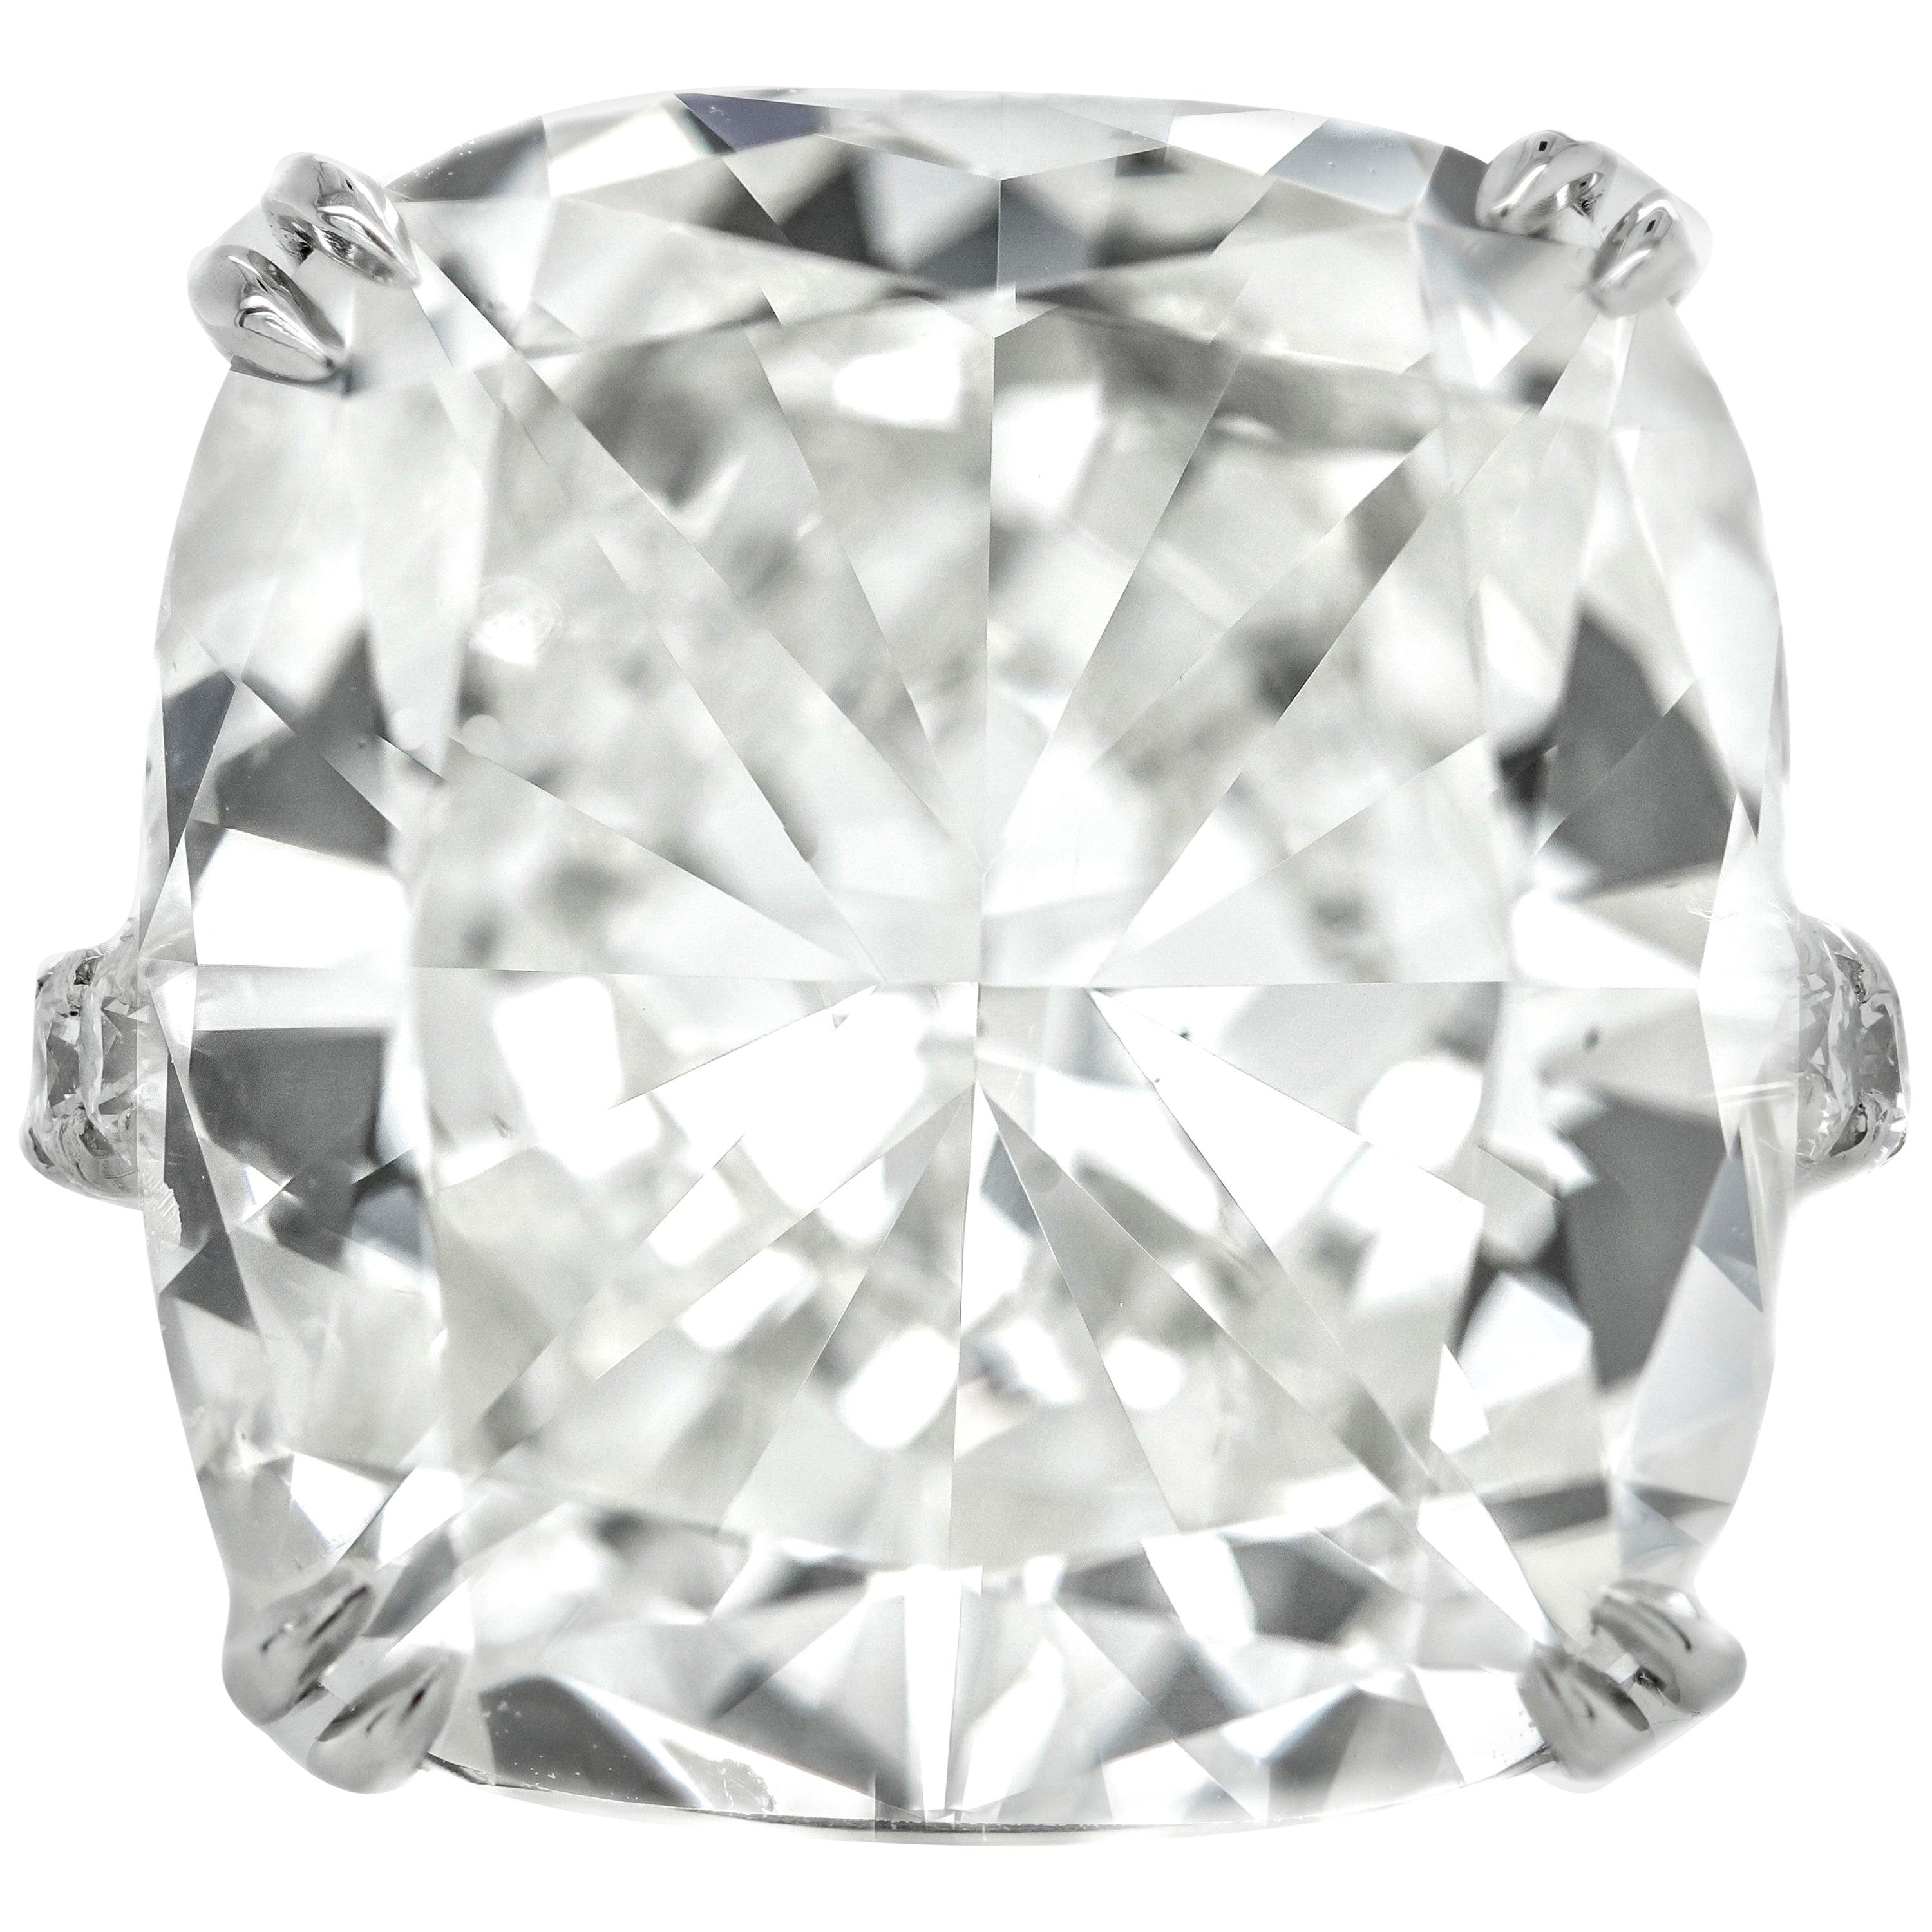 The most exceptional diamond piece designed by Diana M. 
This Magnificent cushion cut brilliant diamond ring is the Highlight of the Diana M. Jewels Spring Collection, a 24.03 Carat J Color, SI1 in Clarity cushion brilliant set into a Platinum Ring